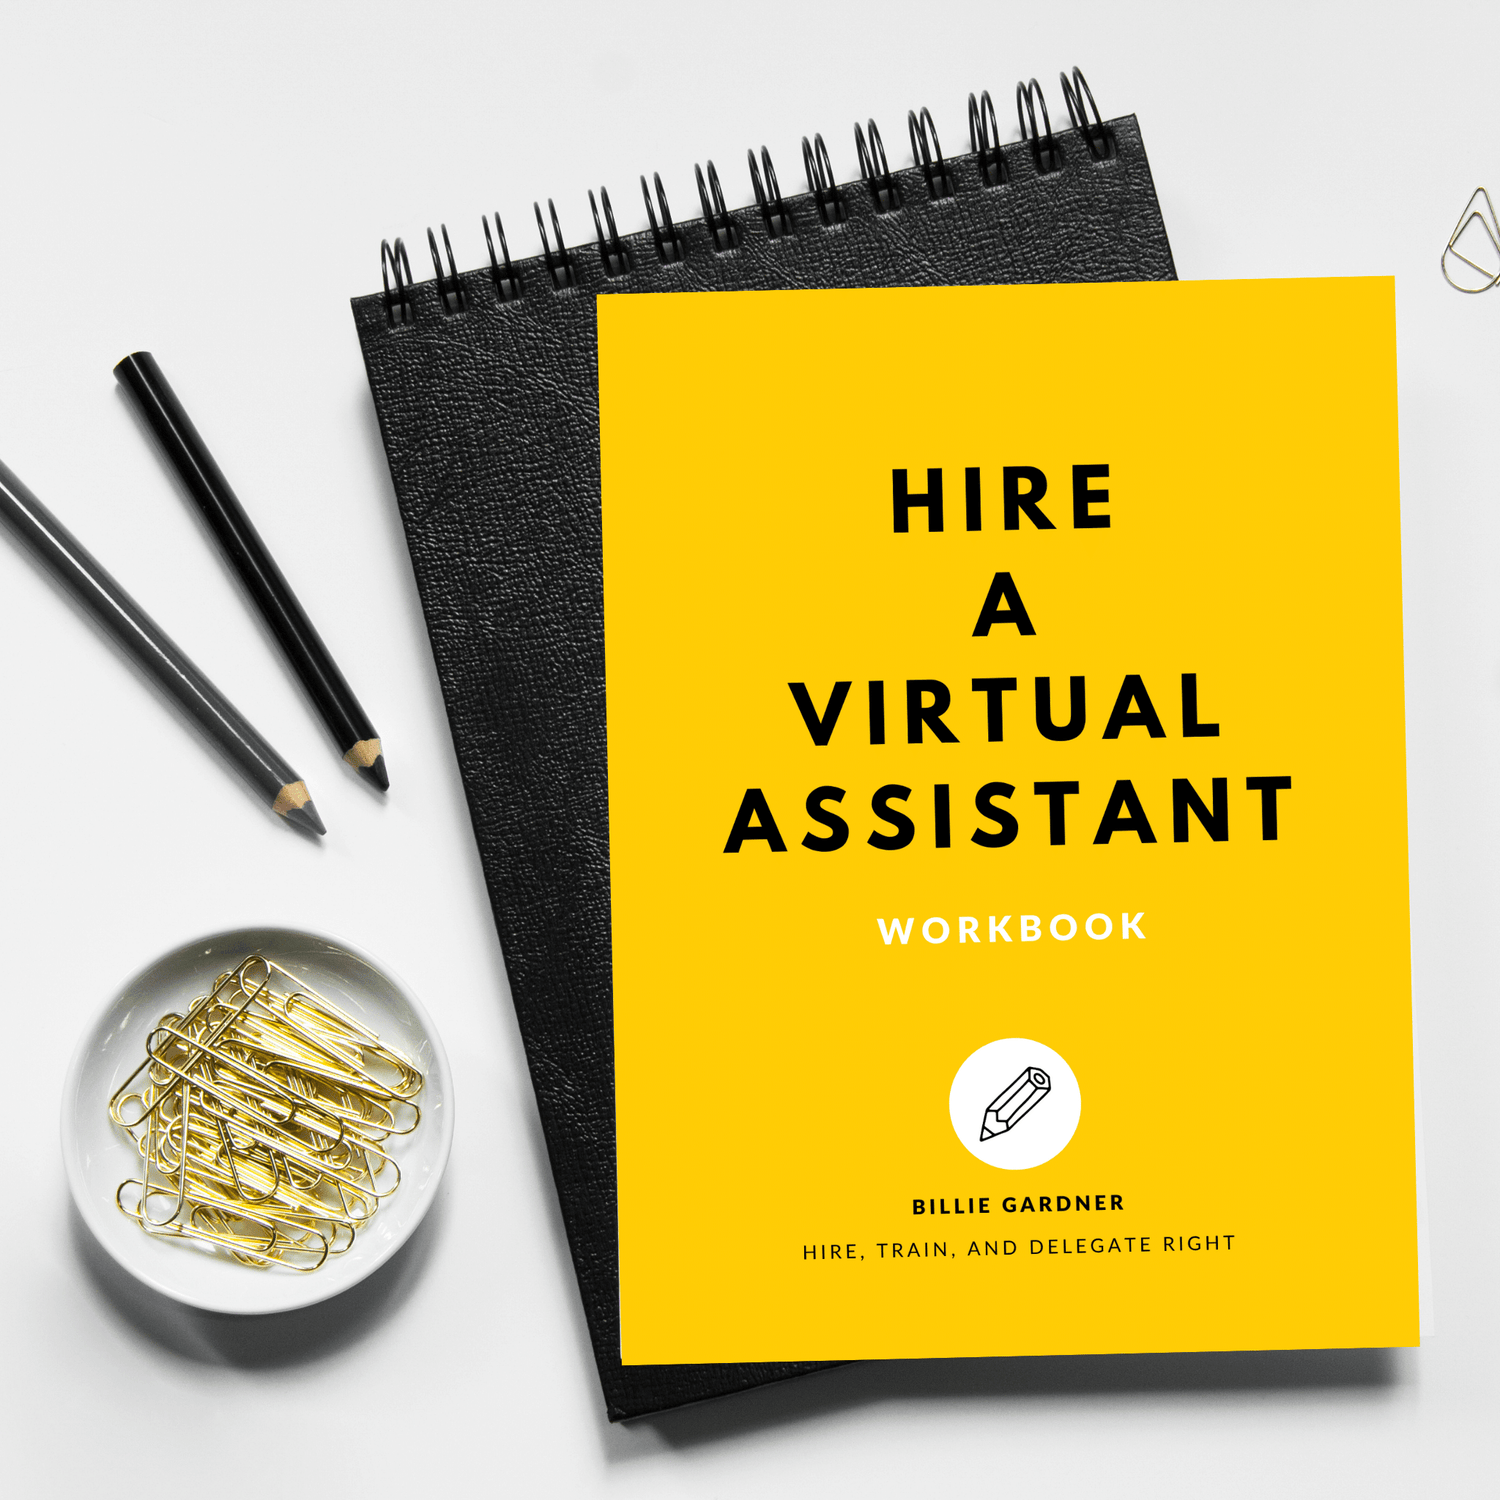 Hire a Virtual Assistant Workbook